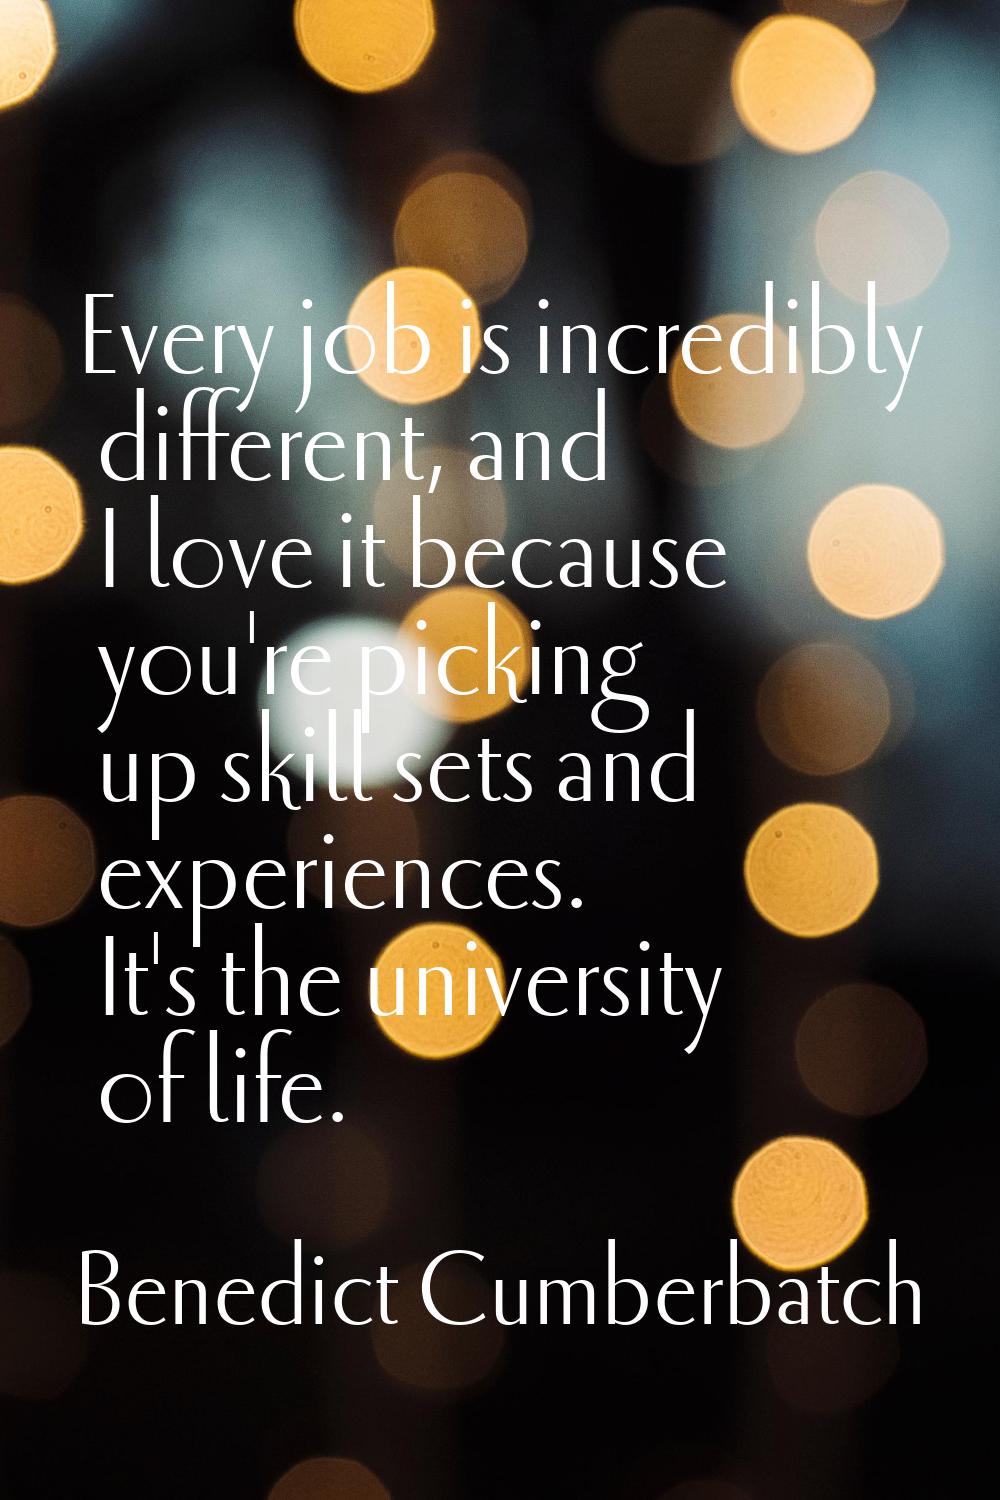 Every job is incredibly different, and I love it because you're picking up skill sets and experienc